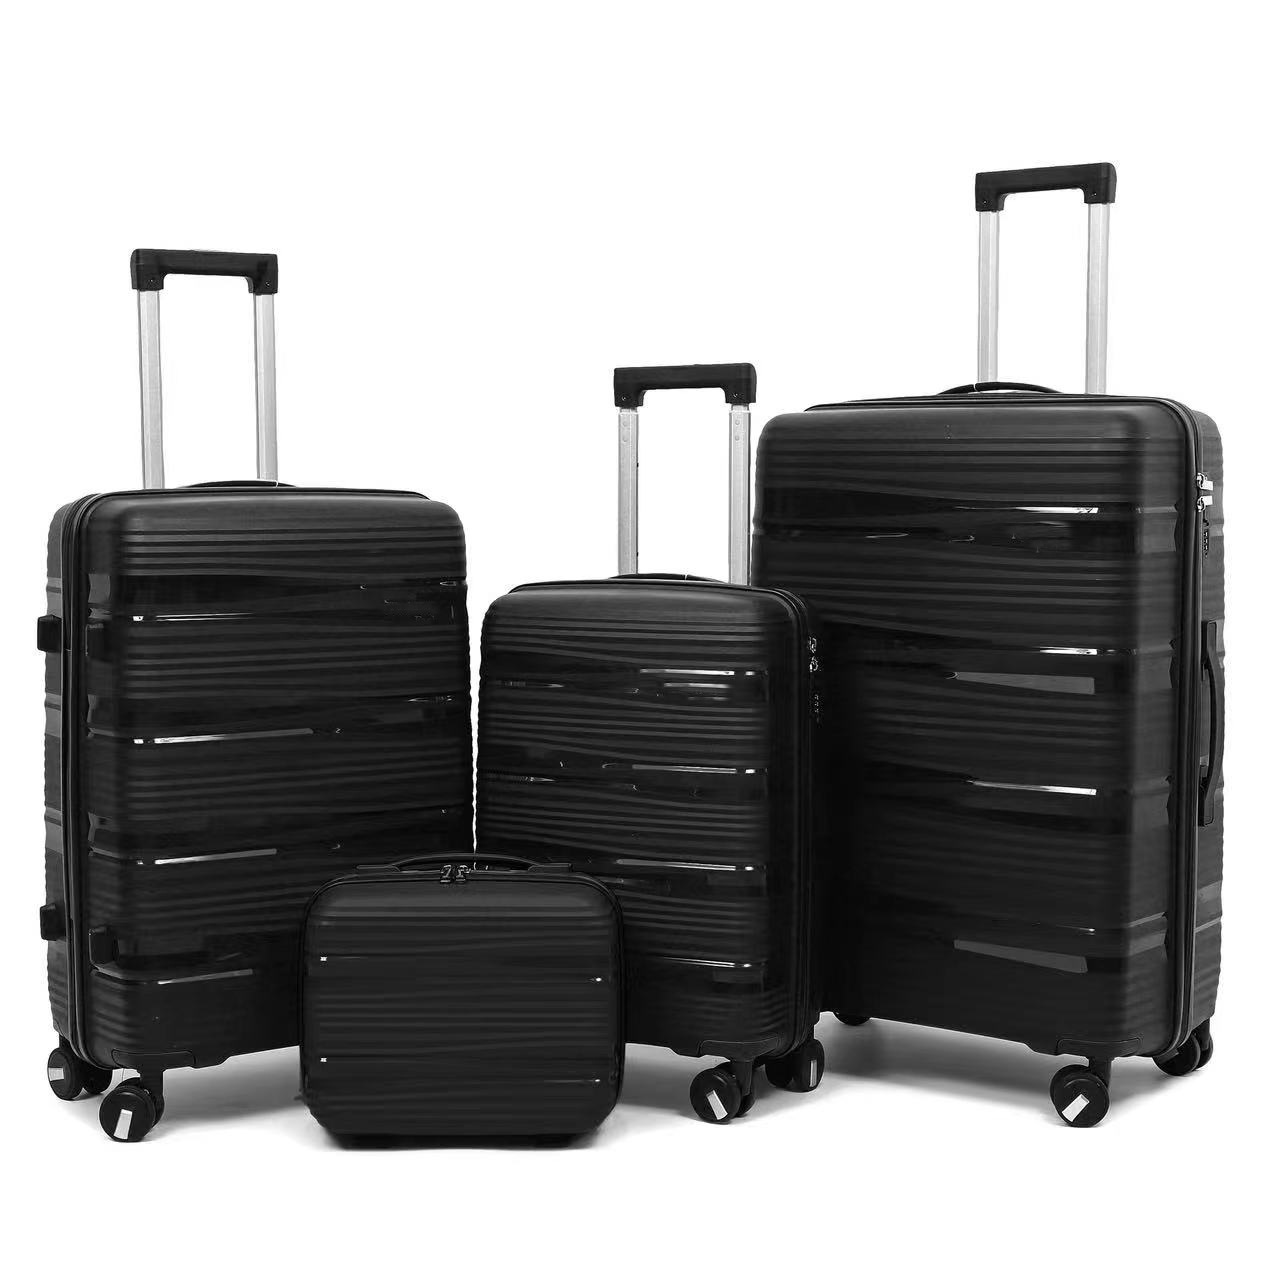 Pp Luggage Zipper Suitcase Spot Foreign Trade Set Three Sets Four Trolley Case Color Matching Sink Lock Explosion-Proof Automobiles Curtain Luggage